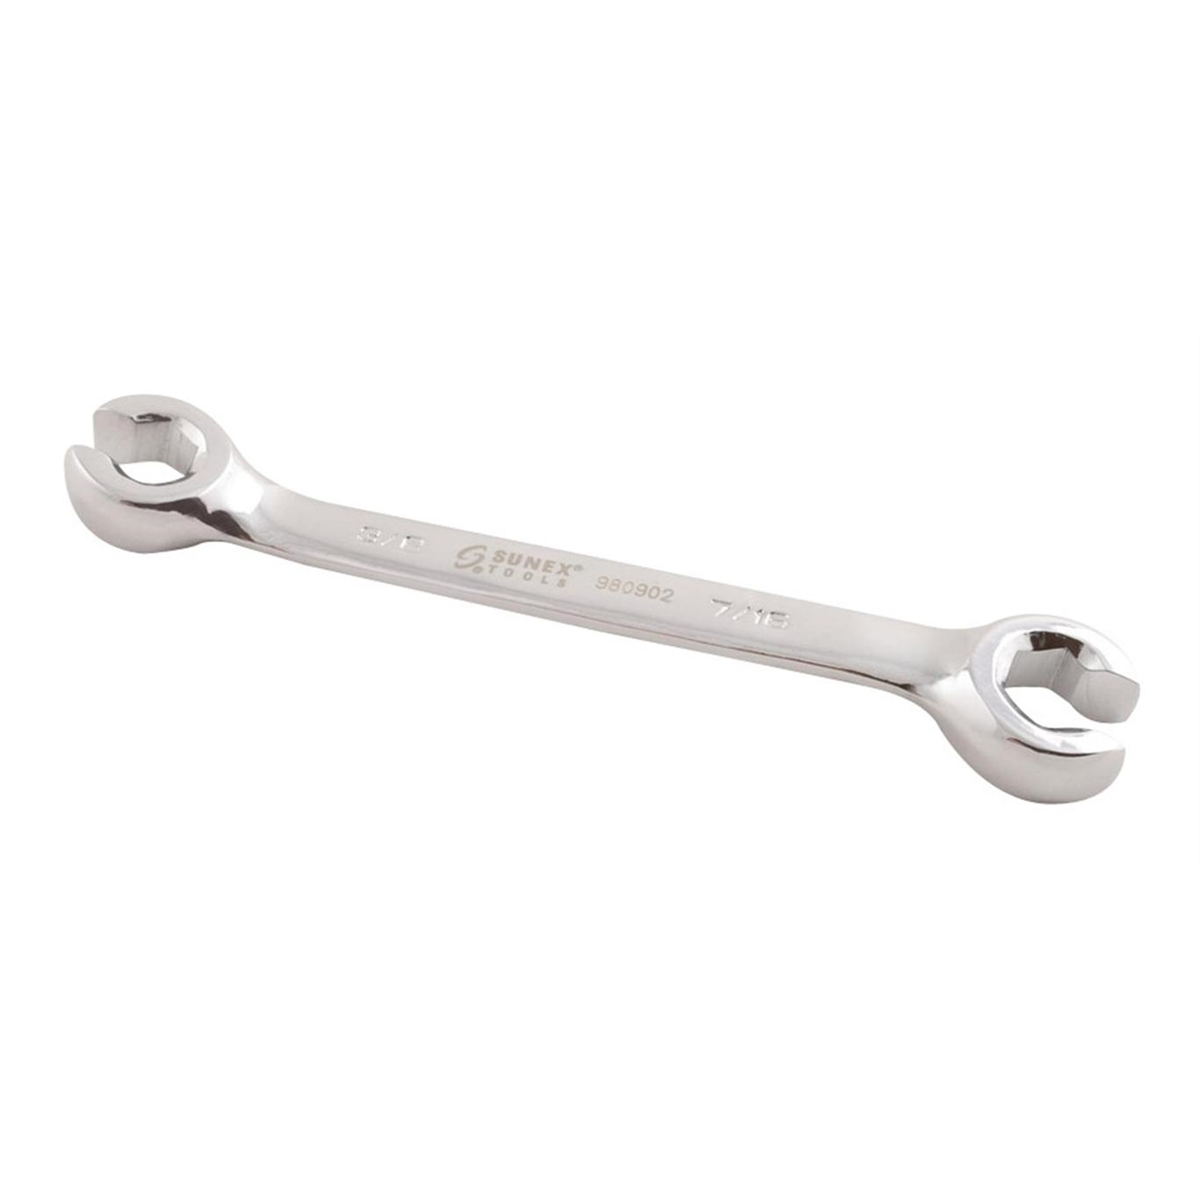 3/8" x 7/16" Flare Nut Wrench